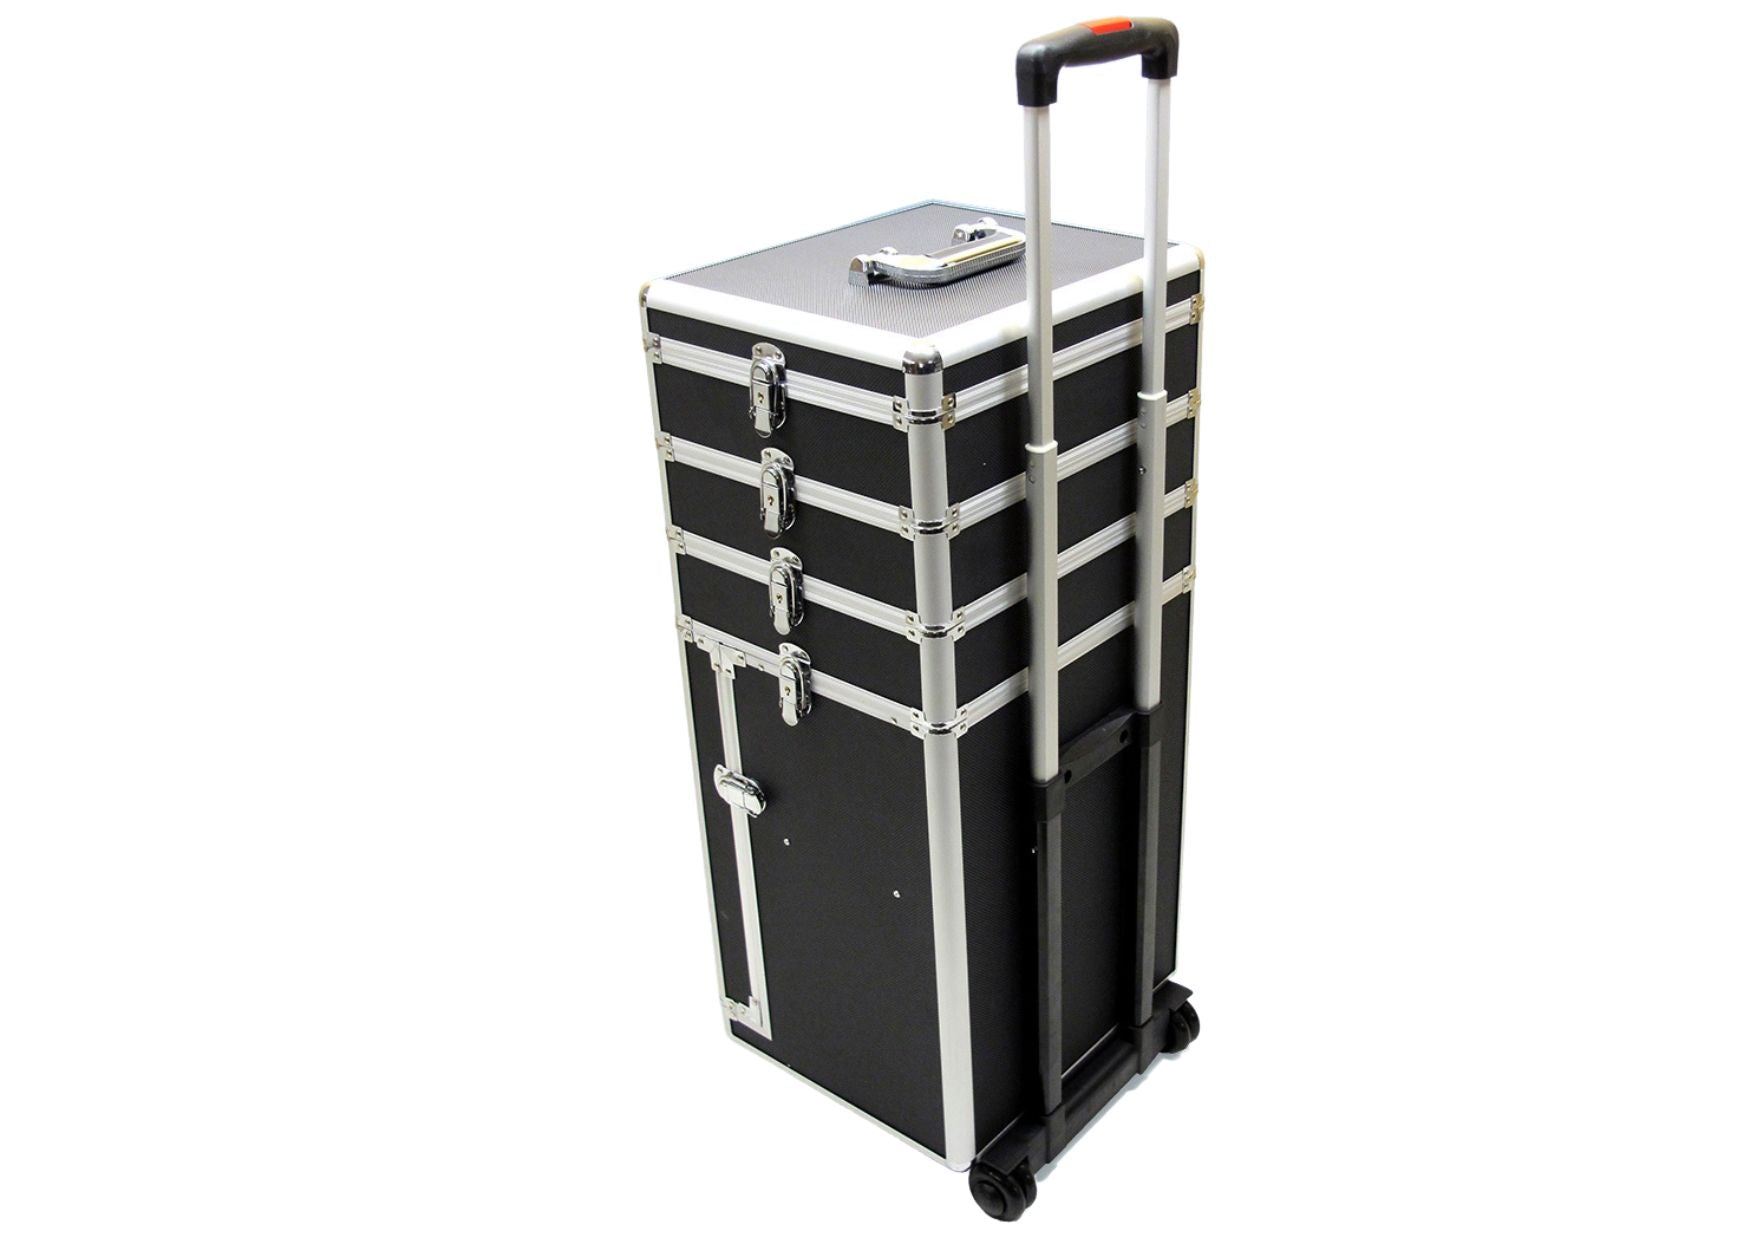 Suitcase trolley in black, dimensions 340 x 370 x 740 mm